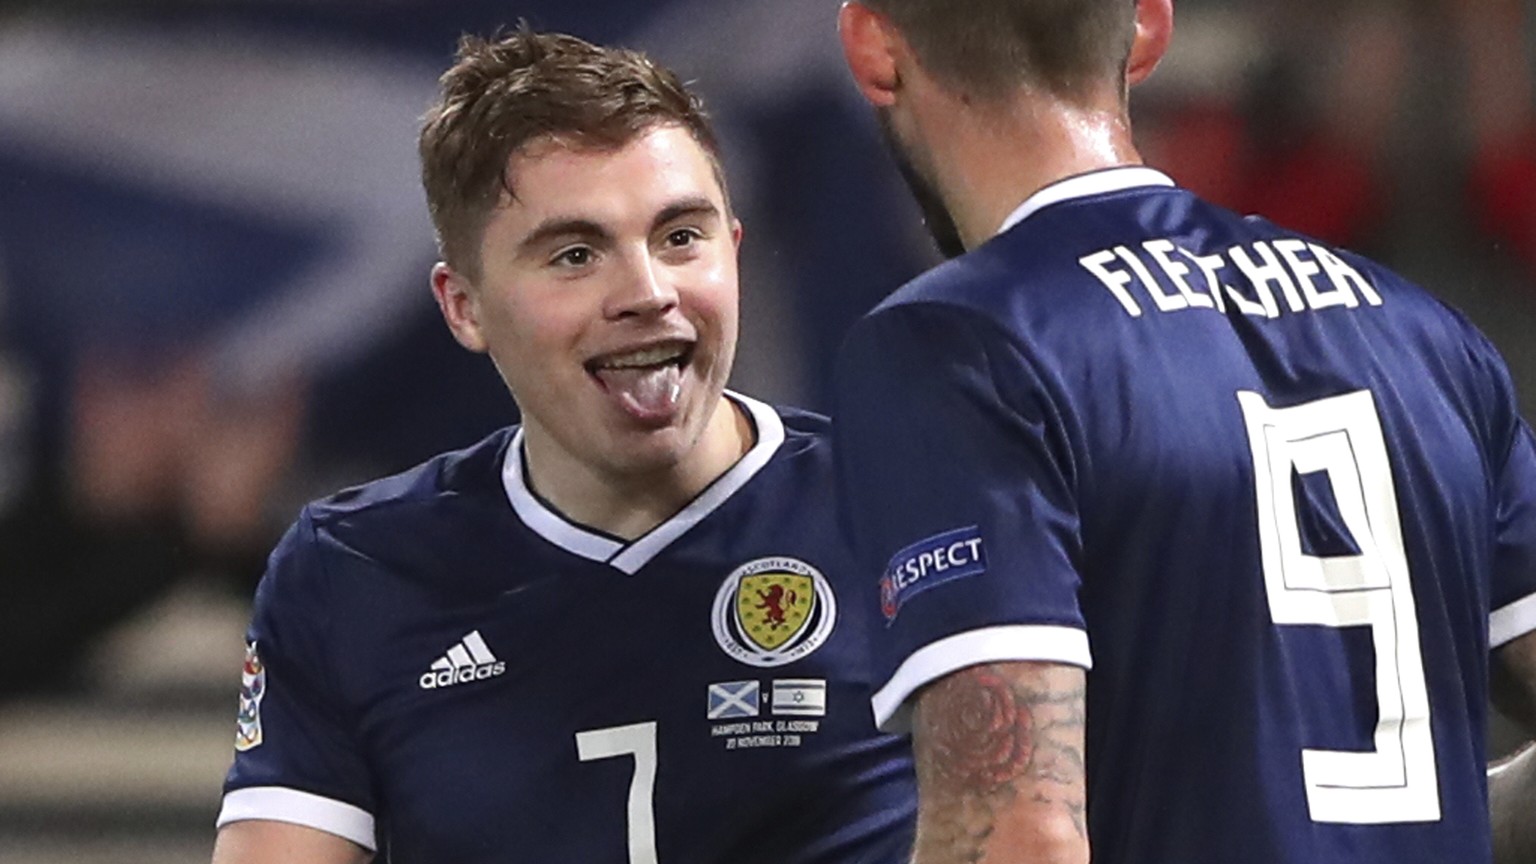 Scotland&#039;s James Forrest, left, reacts with his teammate Steven Fletcher after scoring his side&#039;s third goal during the UEFA Nations League soccer match between Scotland and Israel at Hampde ...